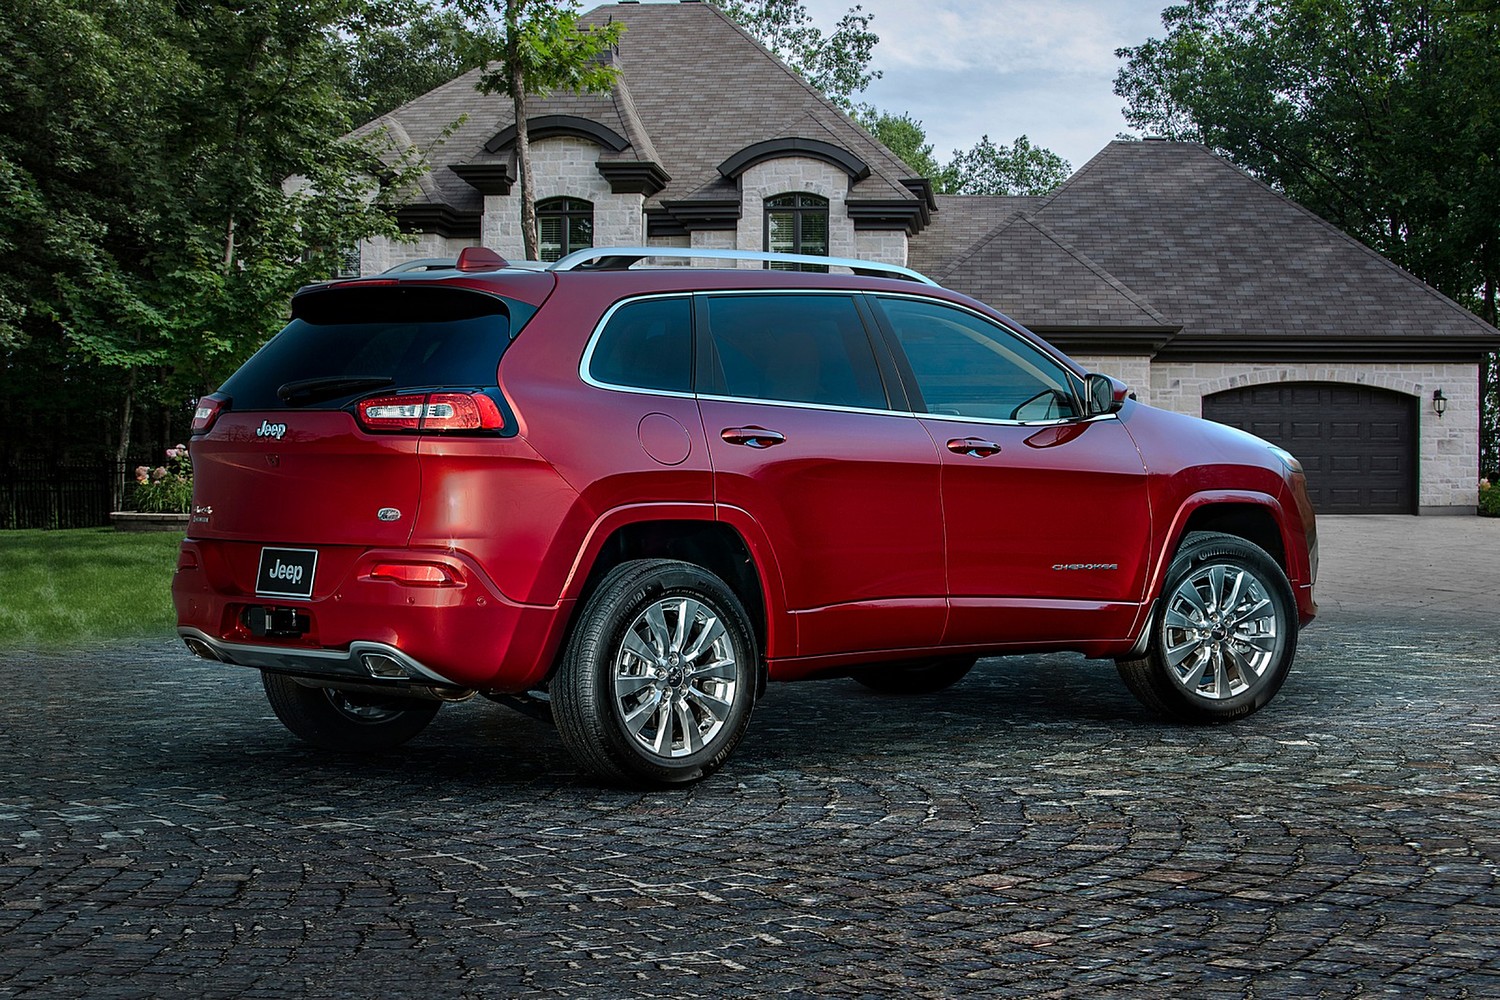 2018 Jeep Cherokee Overland 4dr SUV Exterior